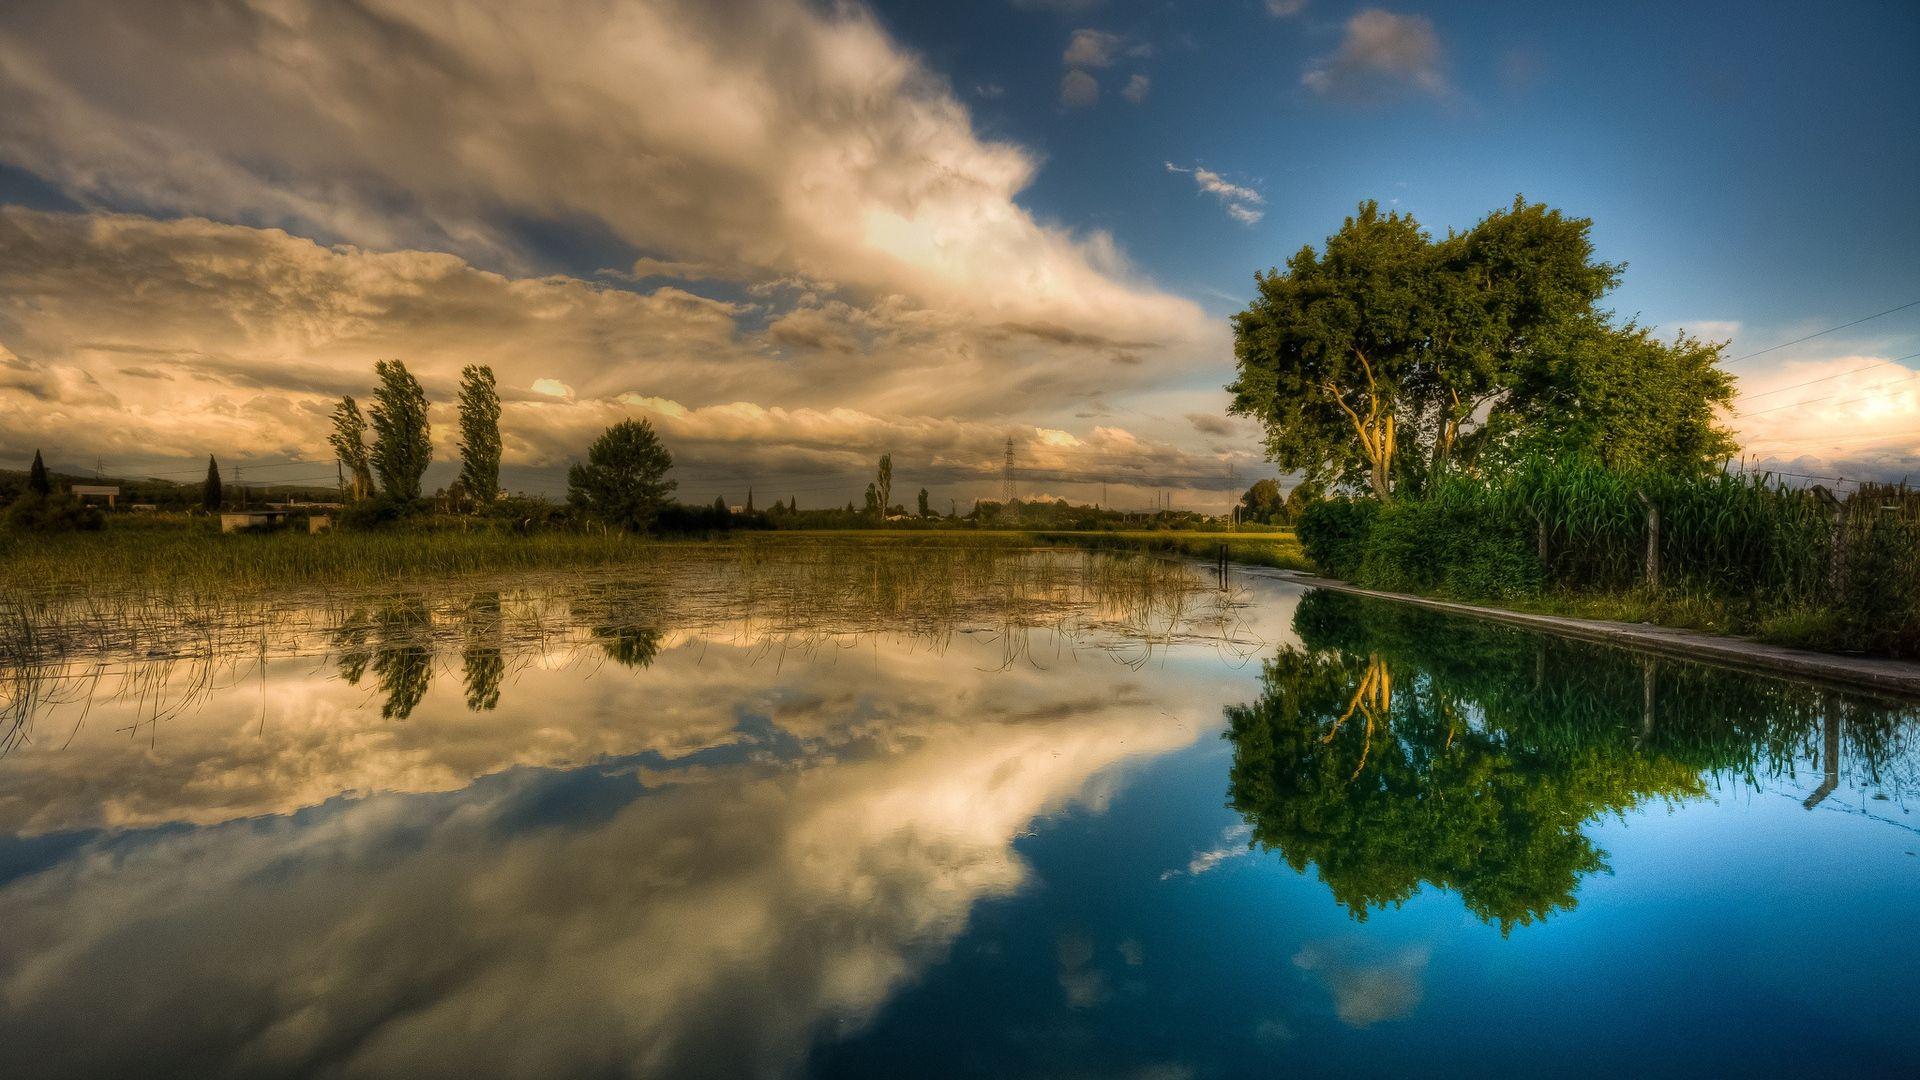 Download Wallpaper 1920x1080 sky, trees, clouds, lake, reflection